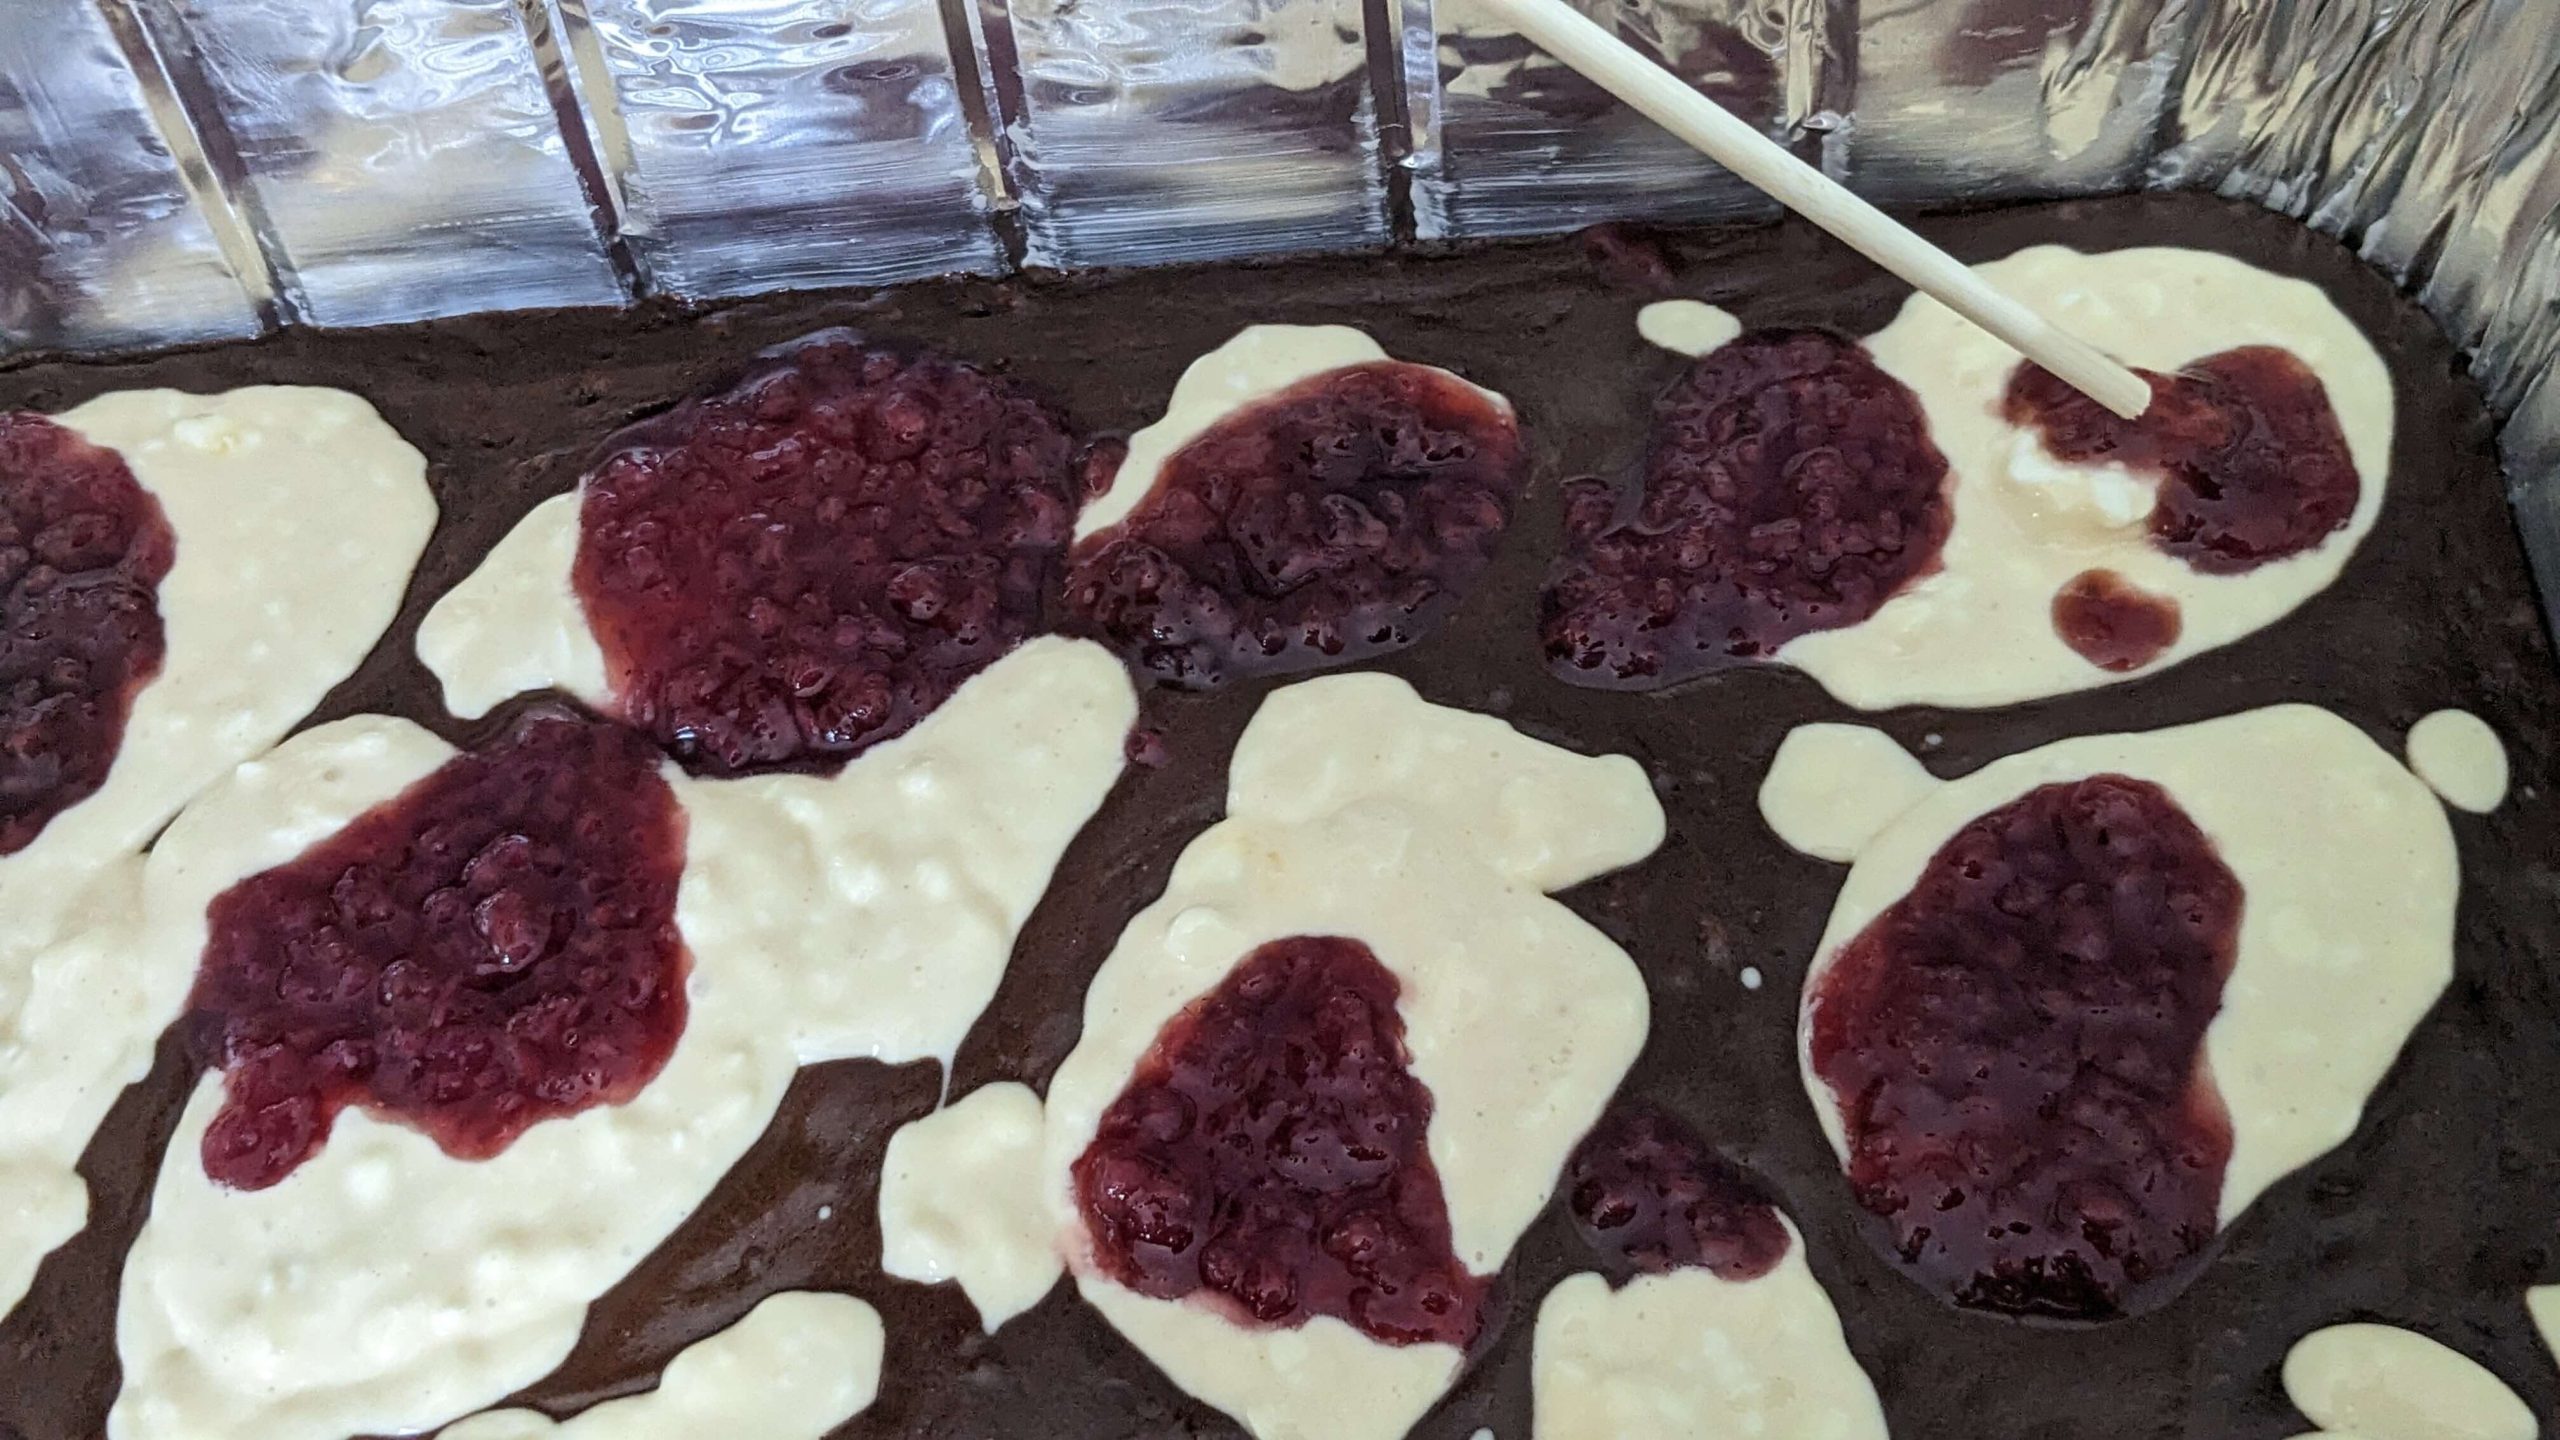 spoonfuls of raspberry jelly and cream cheese mixture dolloped on brownie batter in an aluminum pan